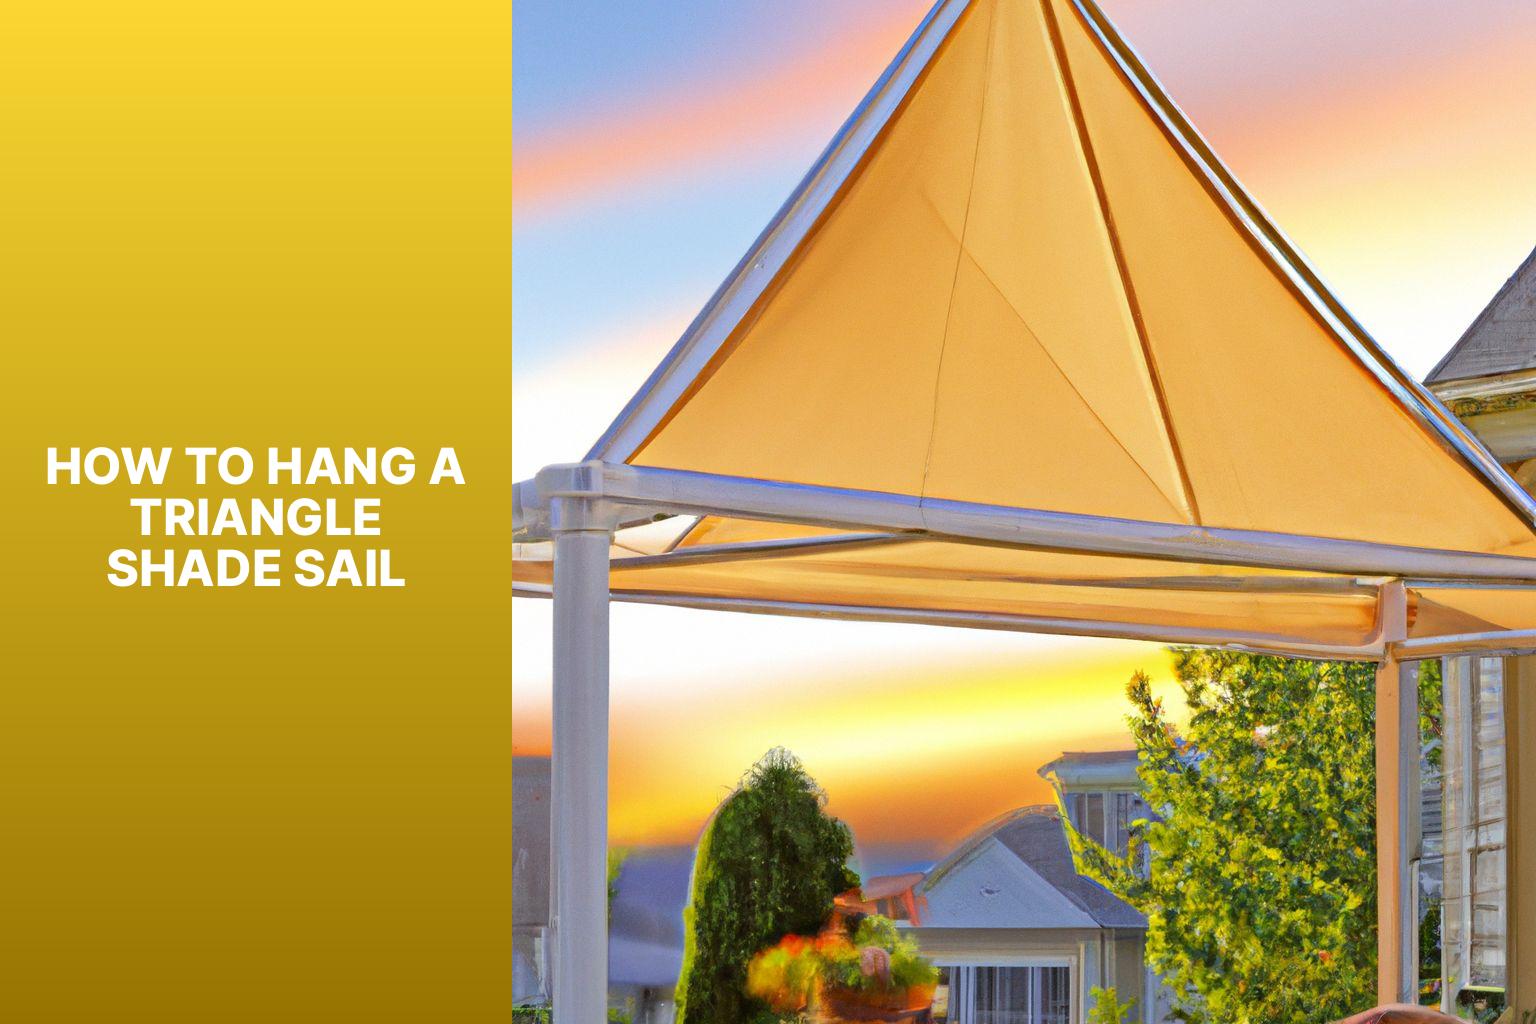 Step-by-Step Guide: How to Hang a Triangle Shade Sail for Optimal Sun Protection